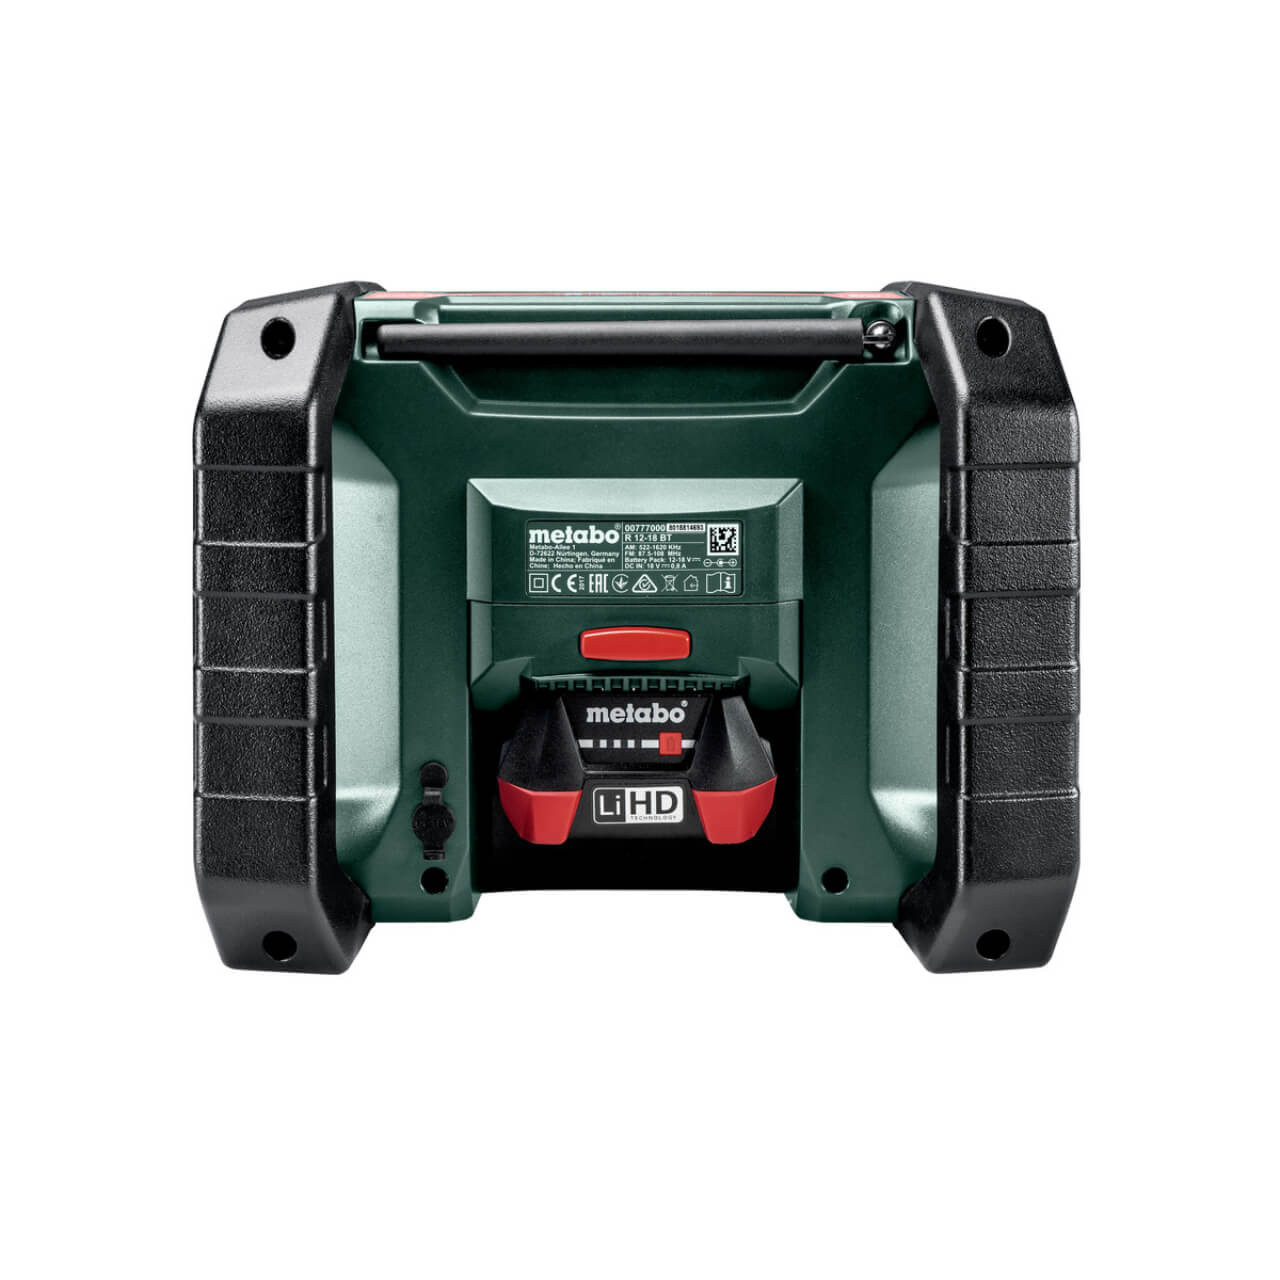 Metabo R 12-18 DAB+ BT 12V/18V Compact AM/FM worksite radio with digital DAB+ and Bluetooth - Skin Only